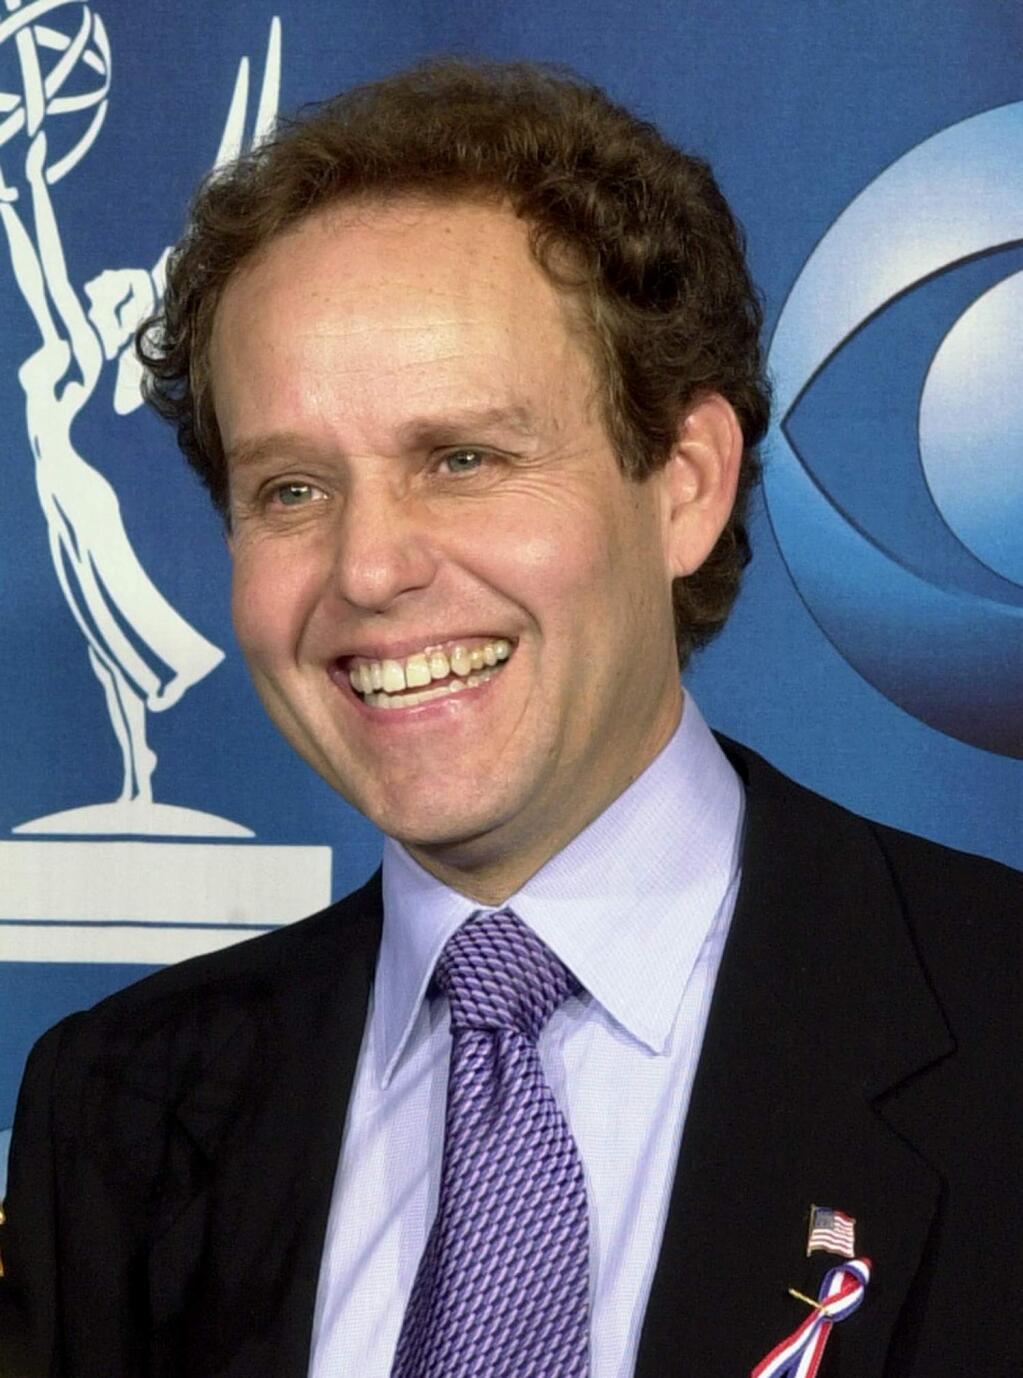 FILE - In this Nov. 4, 2001, file photo, actor Peter MacNicol smiles at the 53rd annual Primetime Emmy Awards at the Shubert Theatre in Los Angeles. MacNicol has been disqualified for an Emmy nomination as a guest for his work in season 5 of 'Veep' because he appeared in two many episodes of the HBO comedy. (AP Photo/Reed Saxon, File)